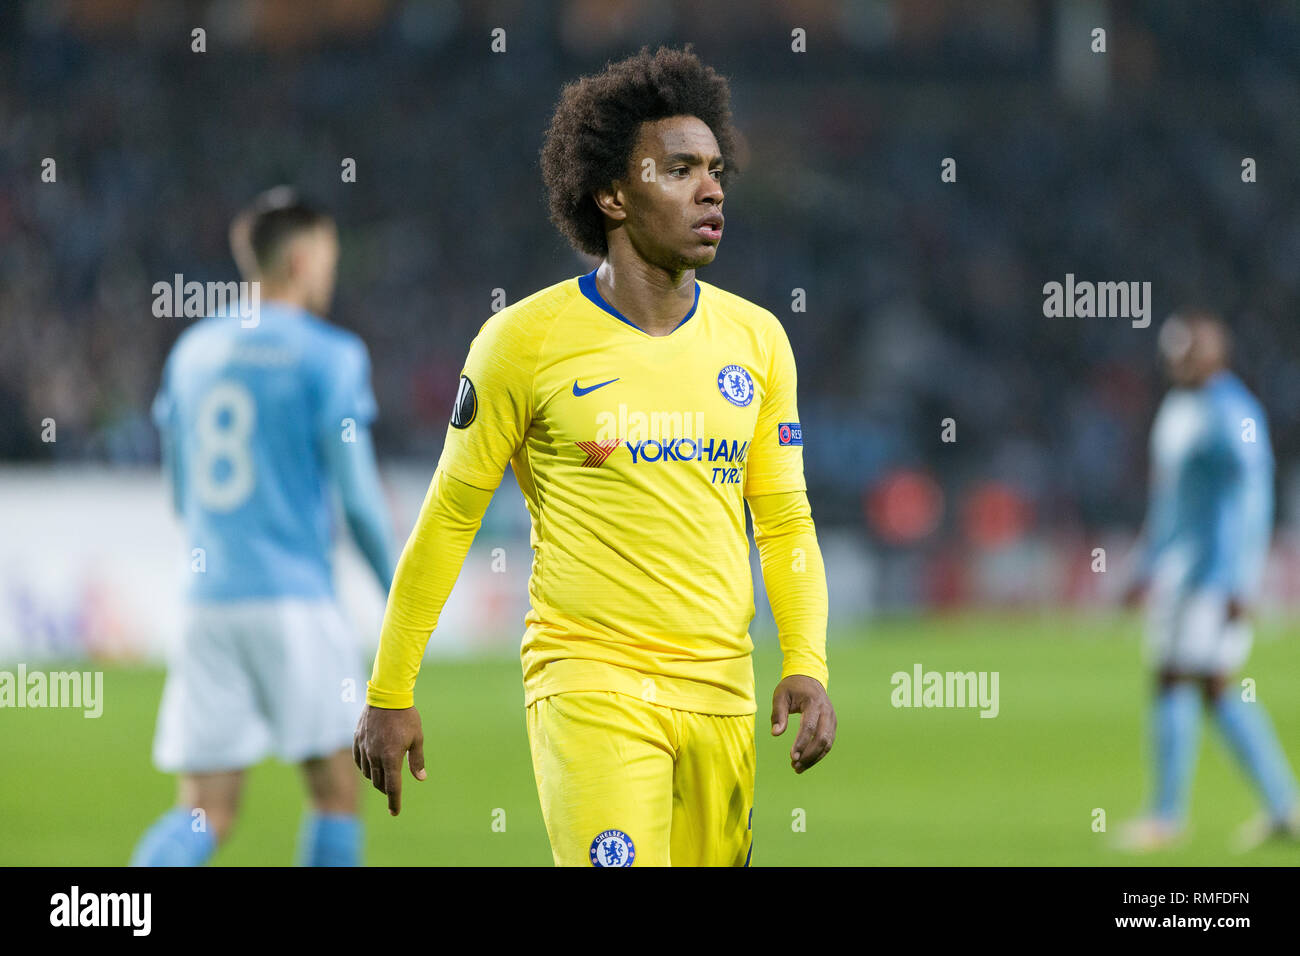 Malmo, Sweden. 14th Feb, 2019. Sweden, Malmö, February 24 2019. Willian (22) of Chelsea FC seen during the Europa League round of 32 match between Malmö FF and Chelsea FC at Swedbank Stadion in Malmö. (Photo Credit: Gonzales Photo/Alamy Live News Stock Photo